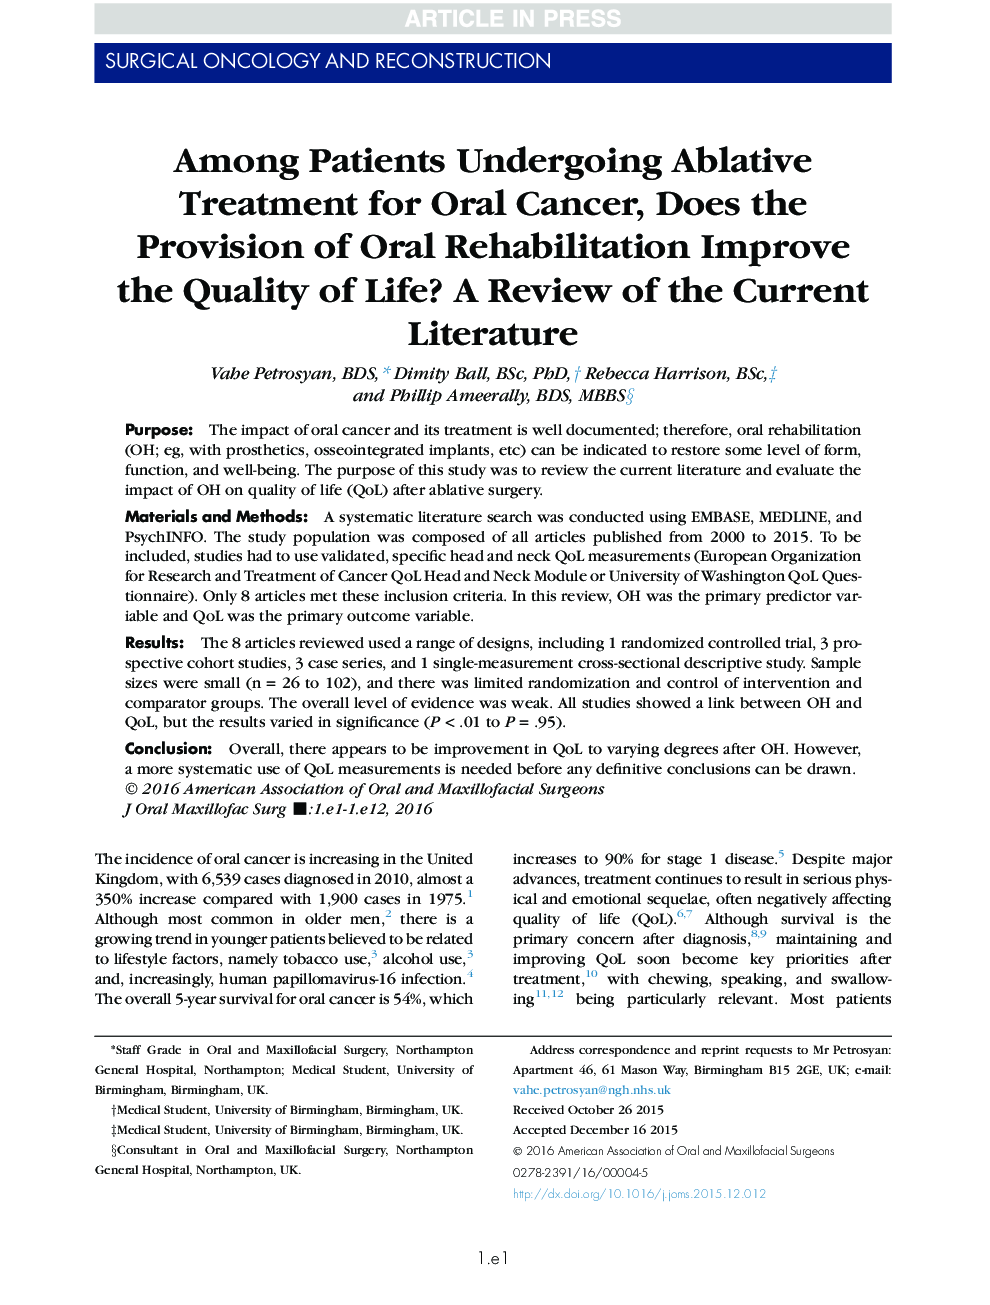 Among Patients Undergoing Ablative Treatment for Oral Cancer, Does the Provision of Oral Rehabilitation Improve the Quality of Life? A Review of the Current Literature